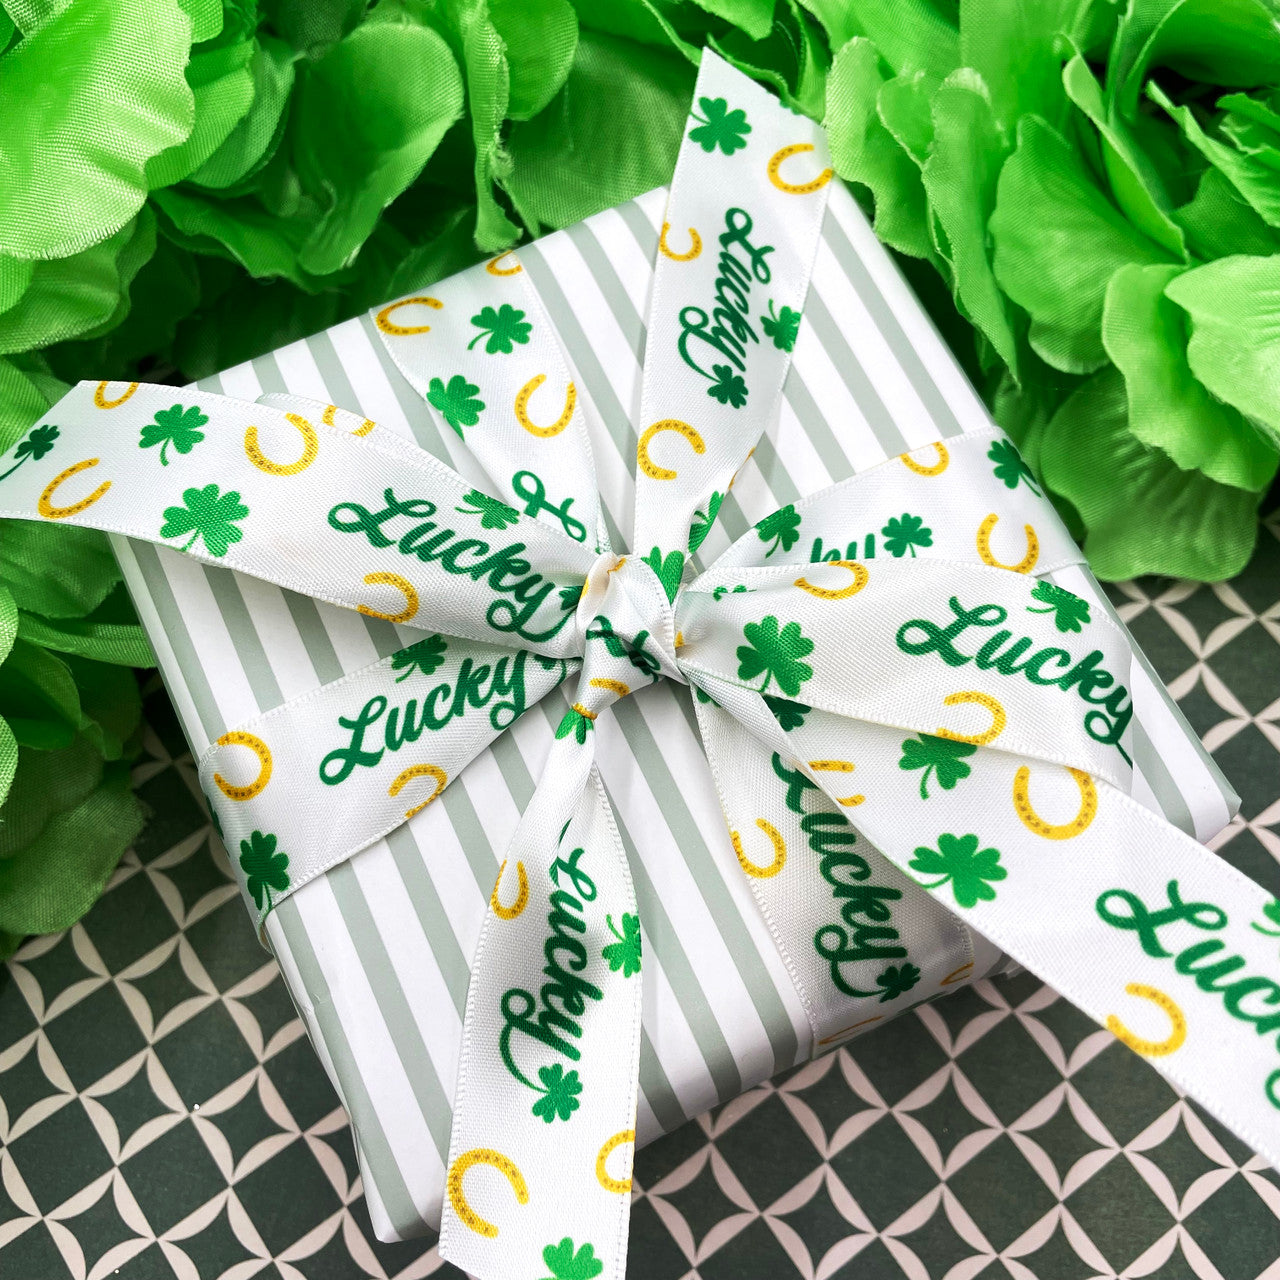 Our fun Lucky ribbon ties a beautiful bow for gifts, hair bows and gift baskets.